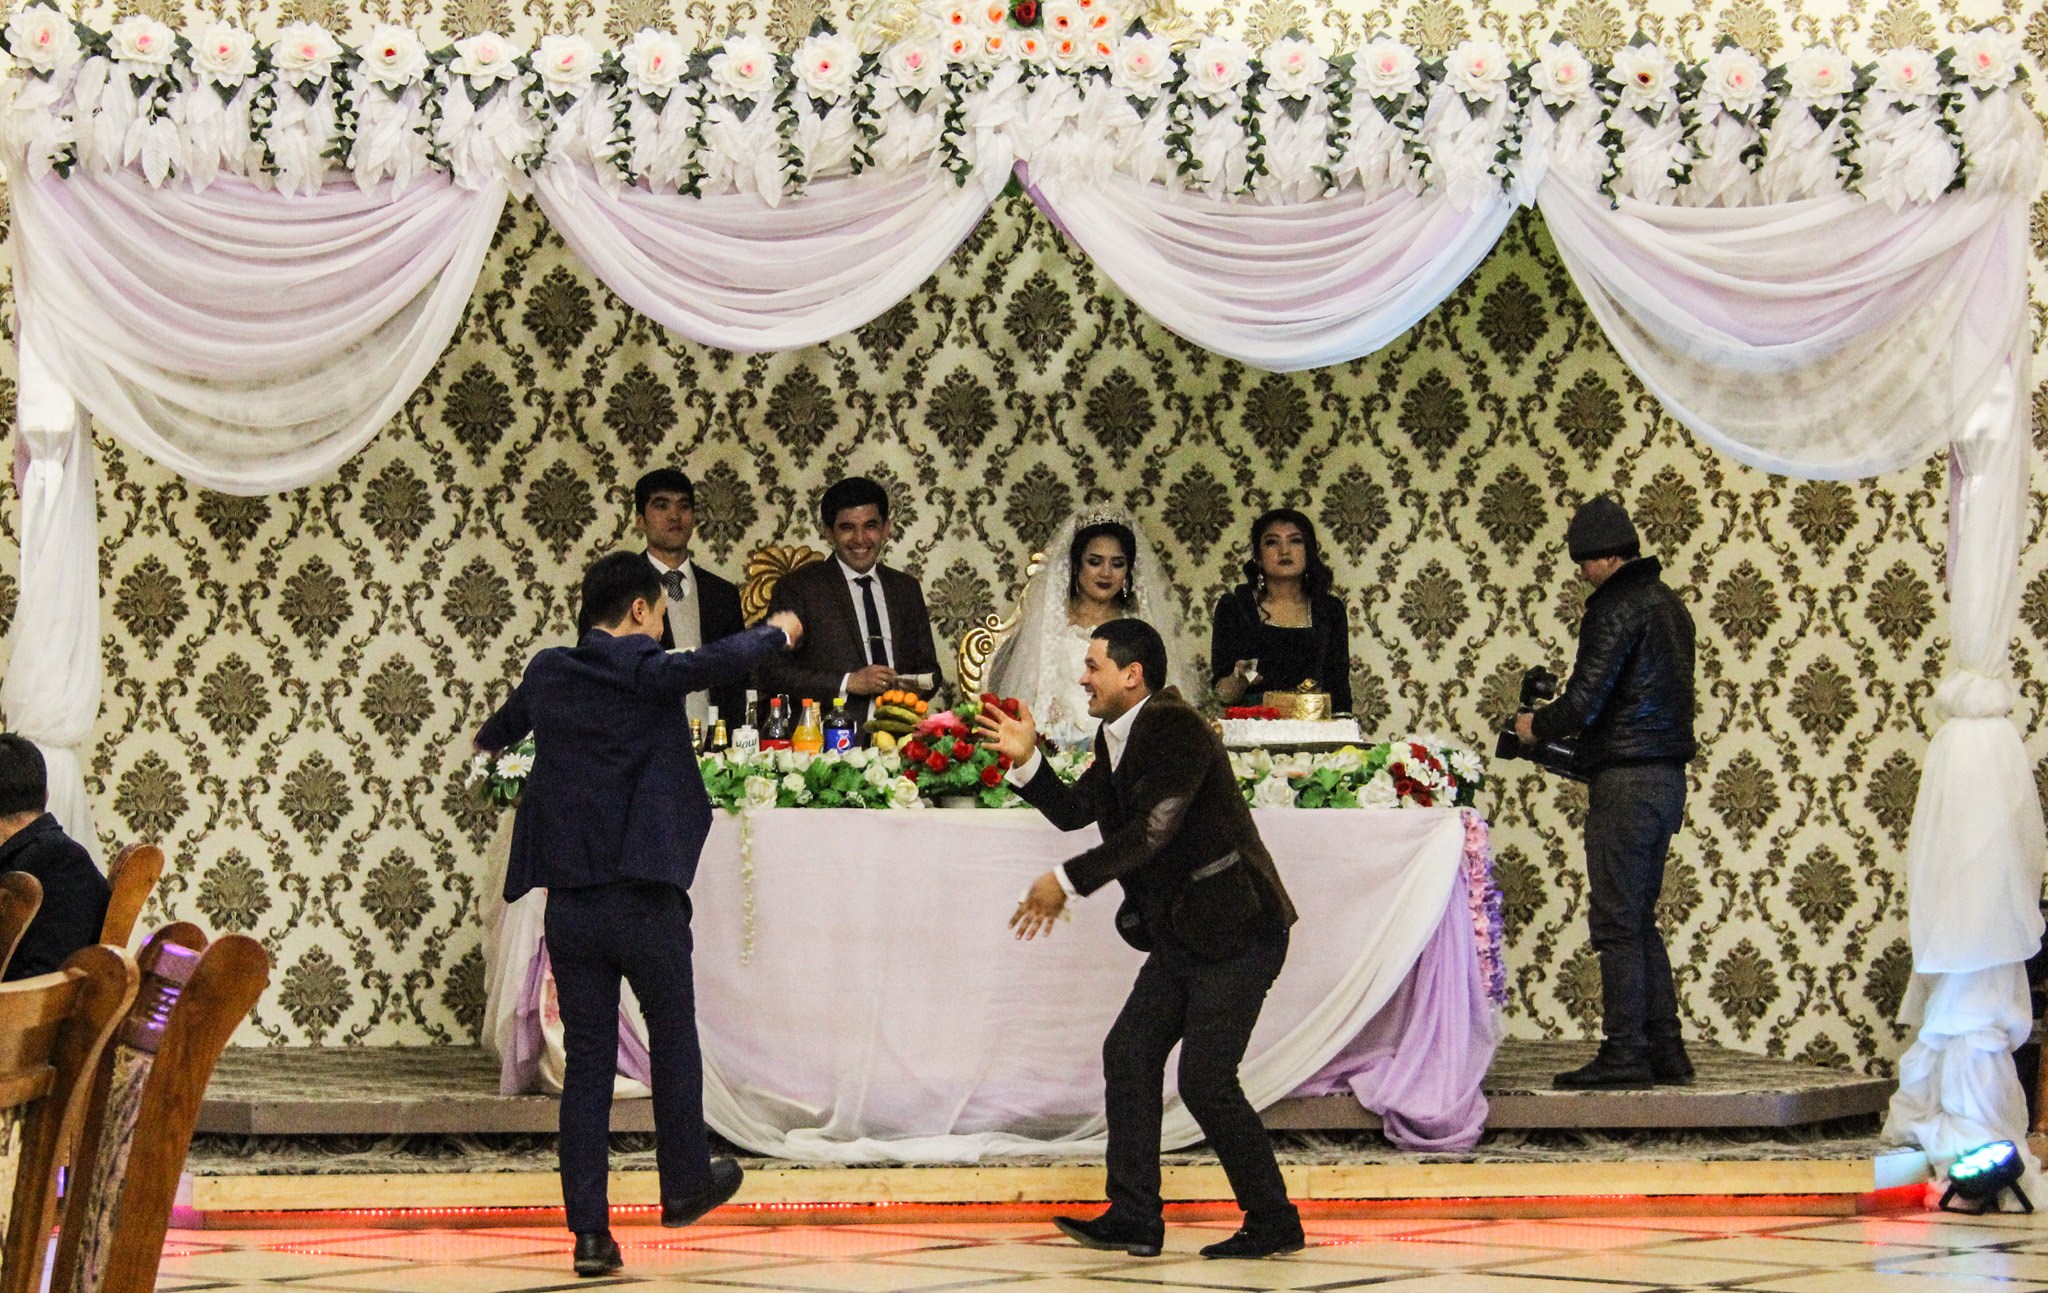 Dancing at an Uzbek wedding organised to collect money for the newlyweds